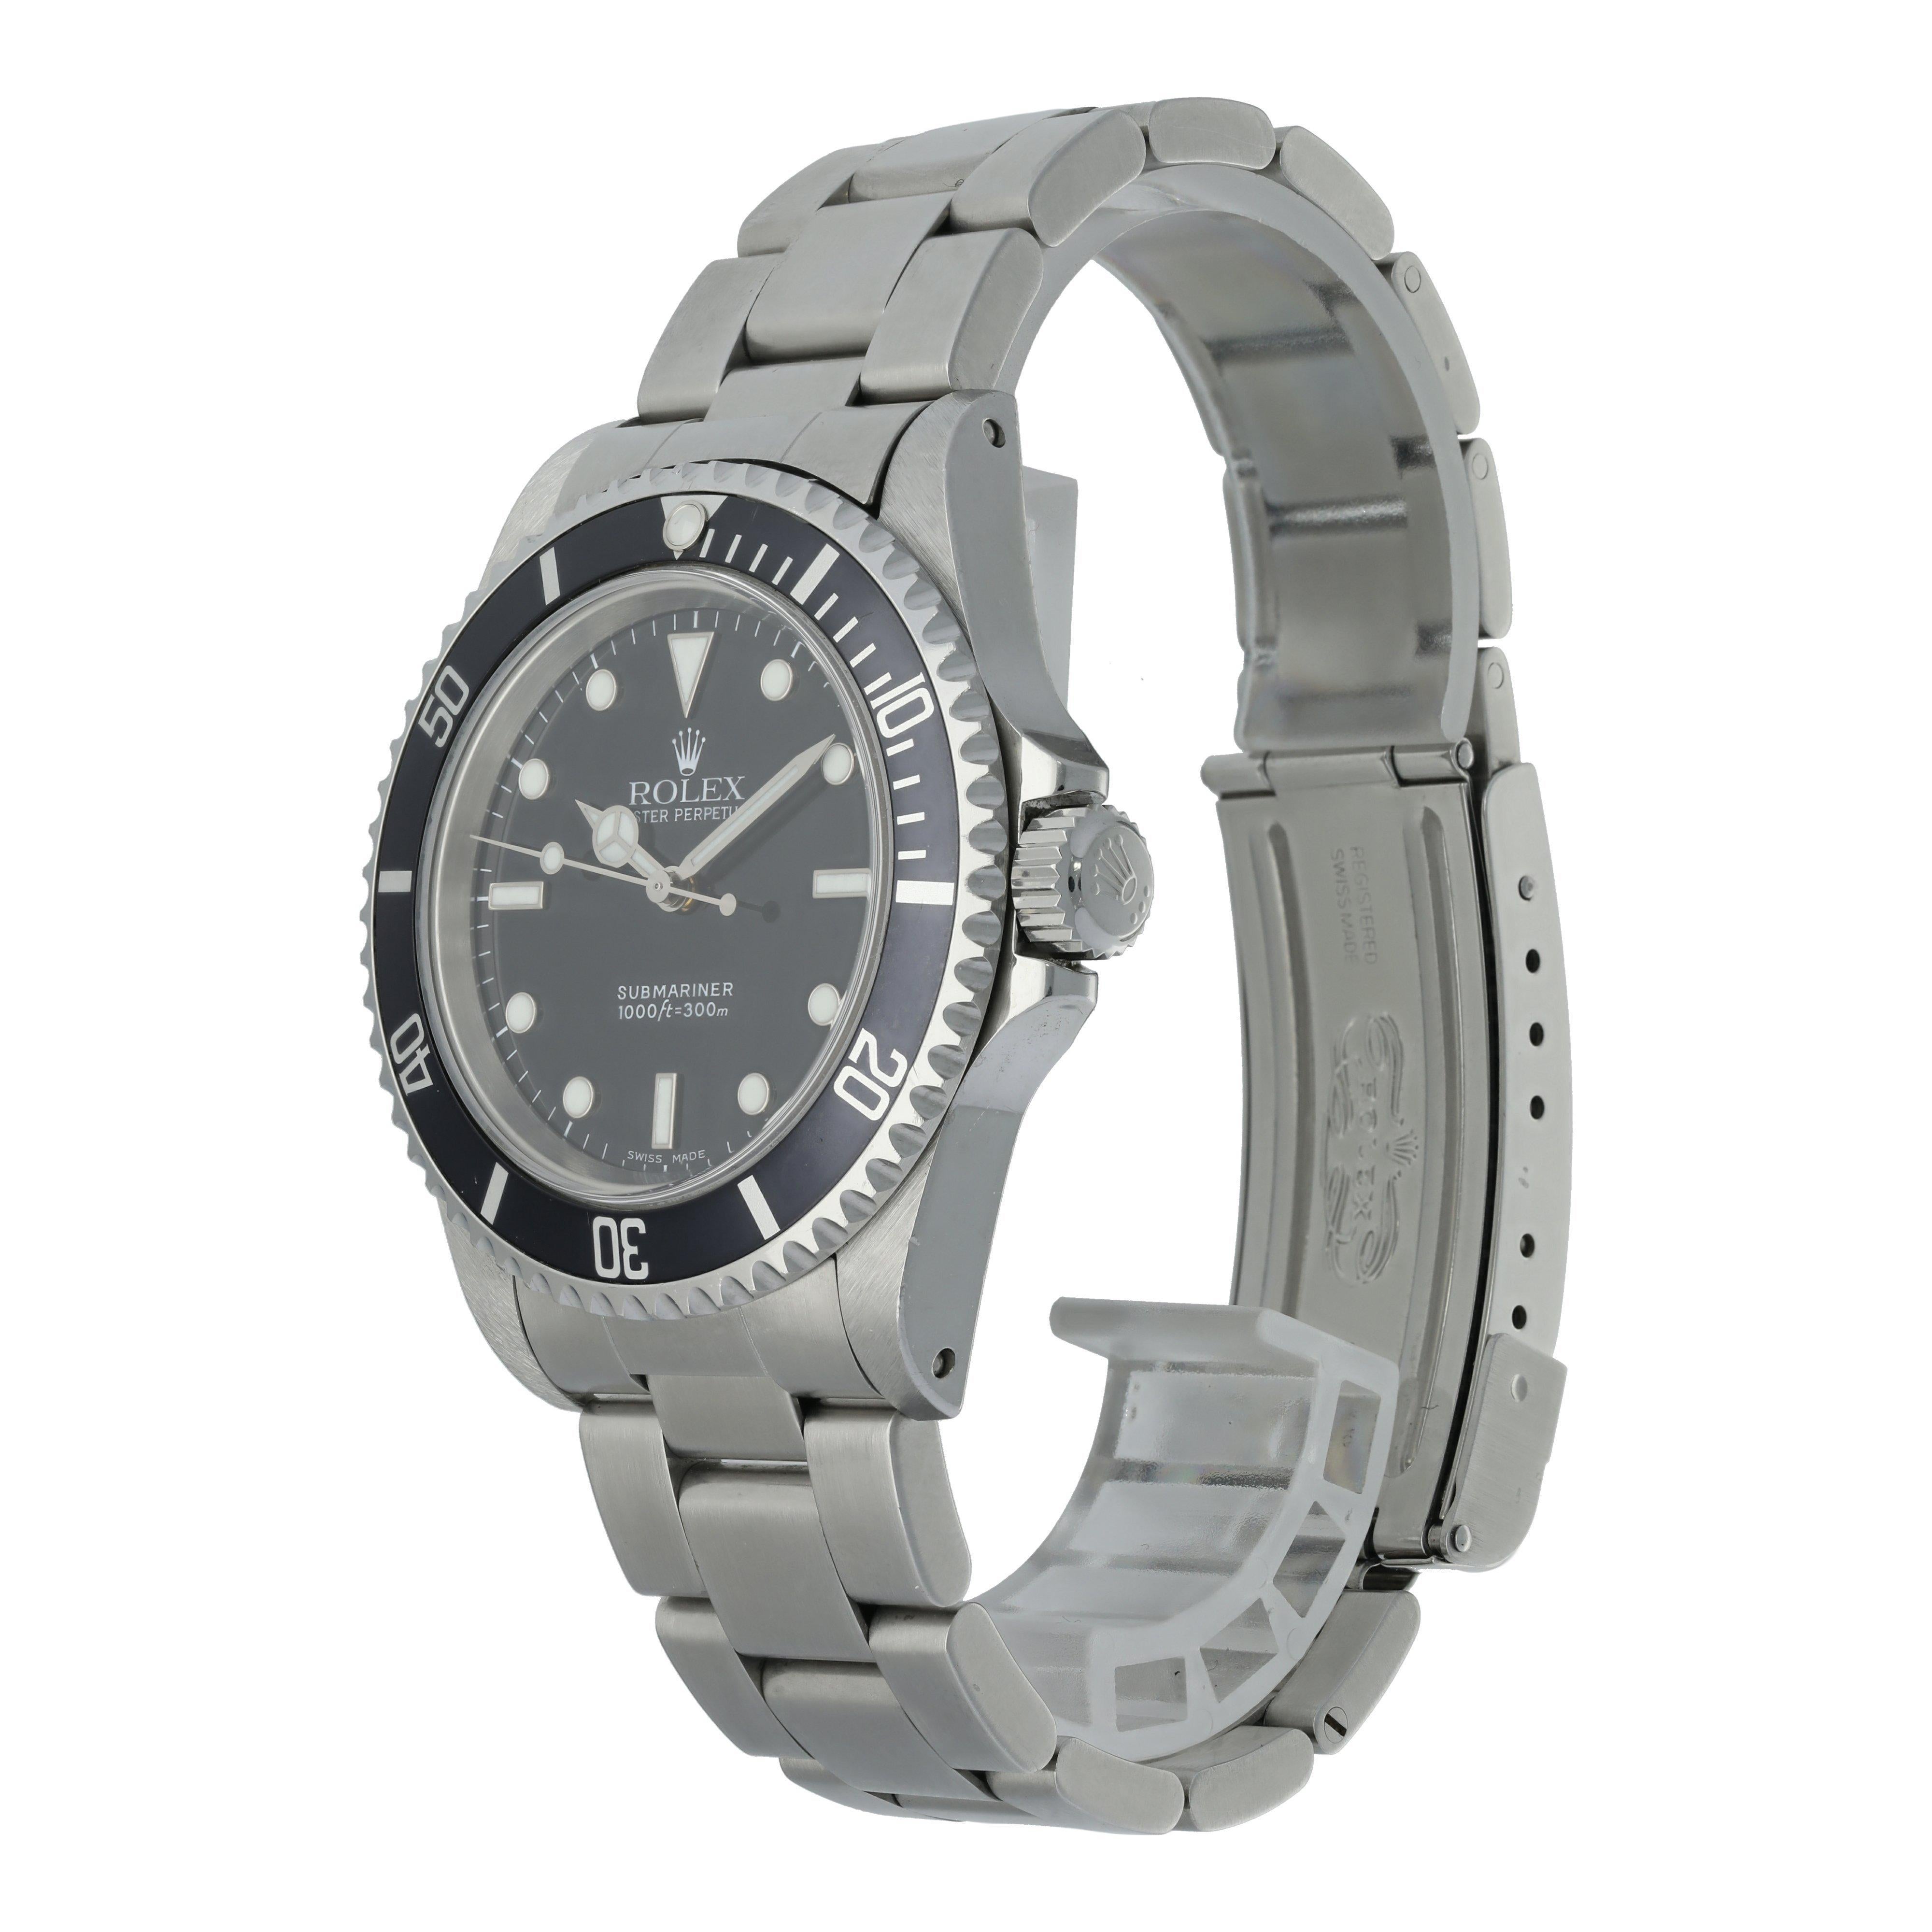 Rolex Submariner 16610 Men Watch. 
40mm Stainless Steel case. 
Stainless Steel Unidirectional bezel. 
Black dial with Luminous Steel hands indexes and dot hour markers. 
Minute markers on the outer dial. 
Date display at the 3 o'clock position.